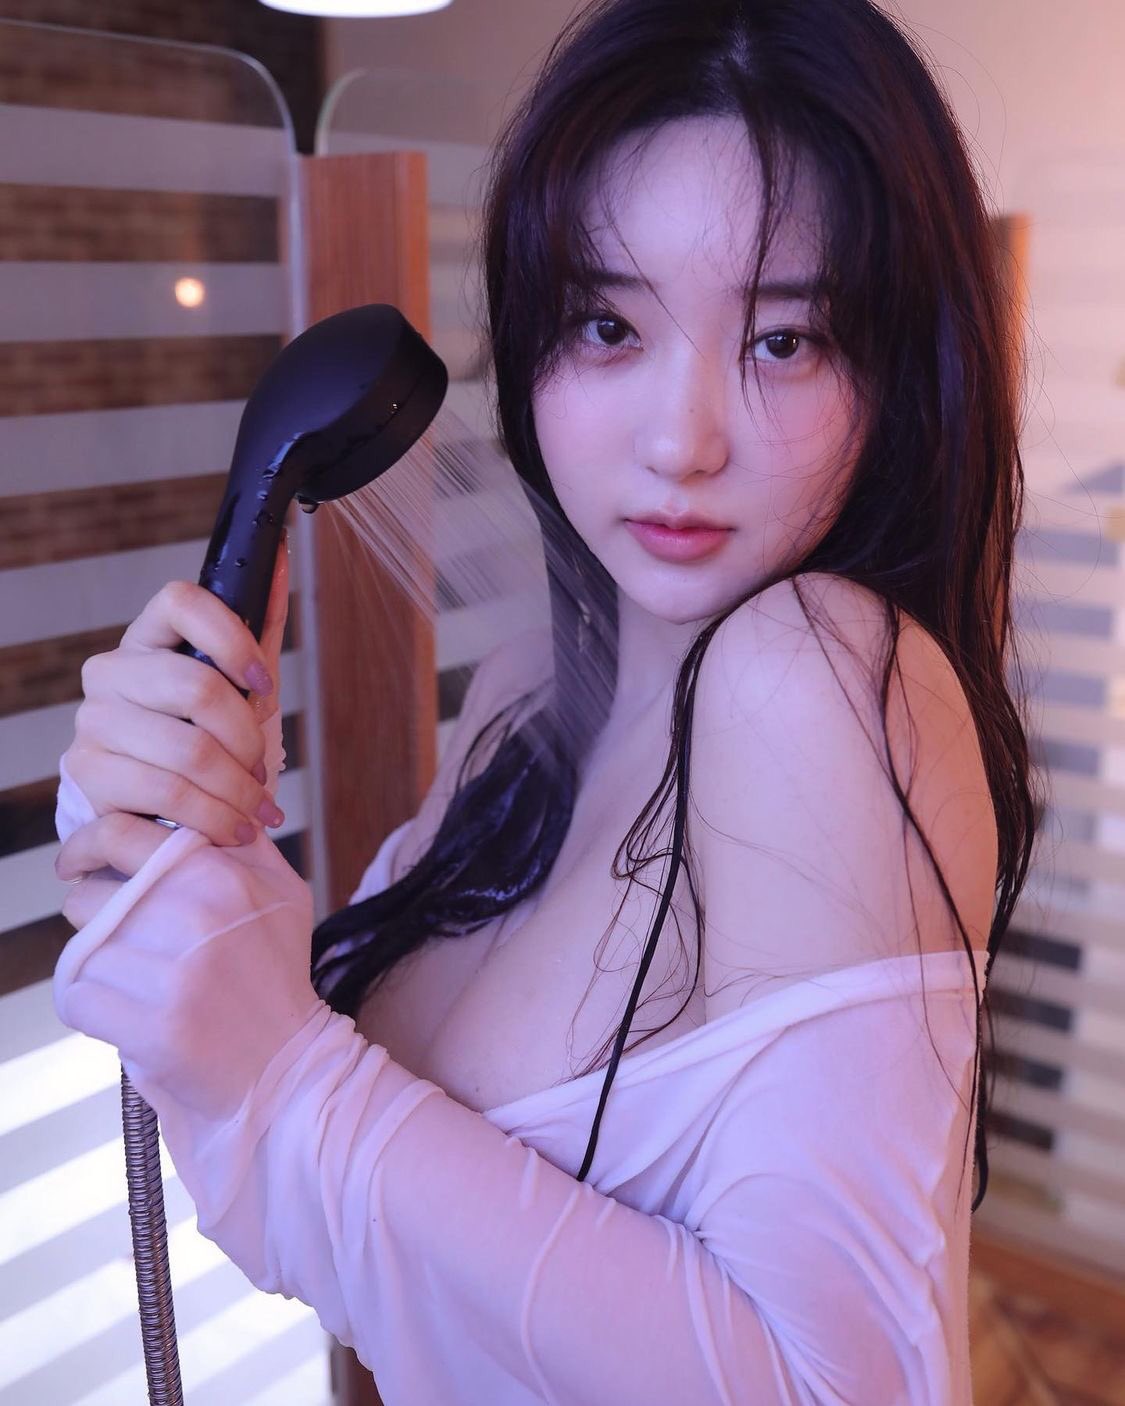 Zennyrt, Korean Model with Baby Face and Mature Figure